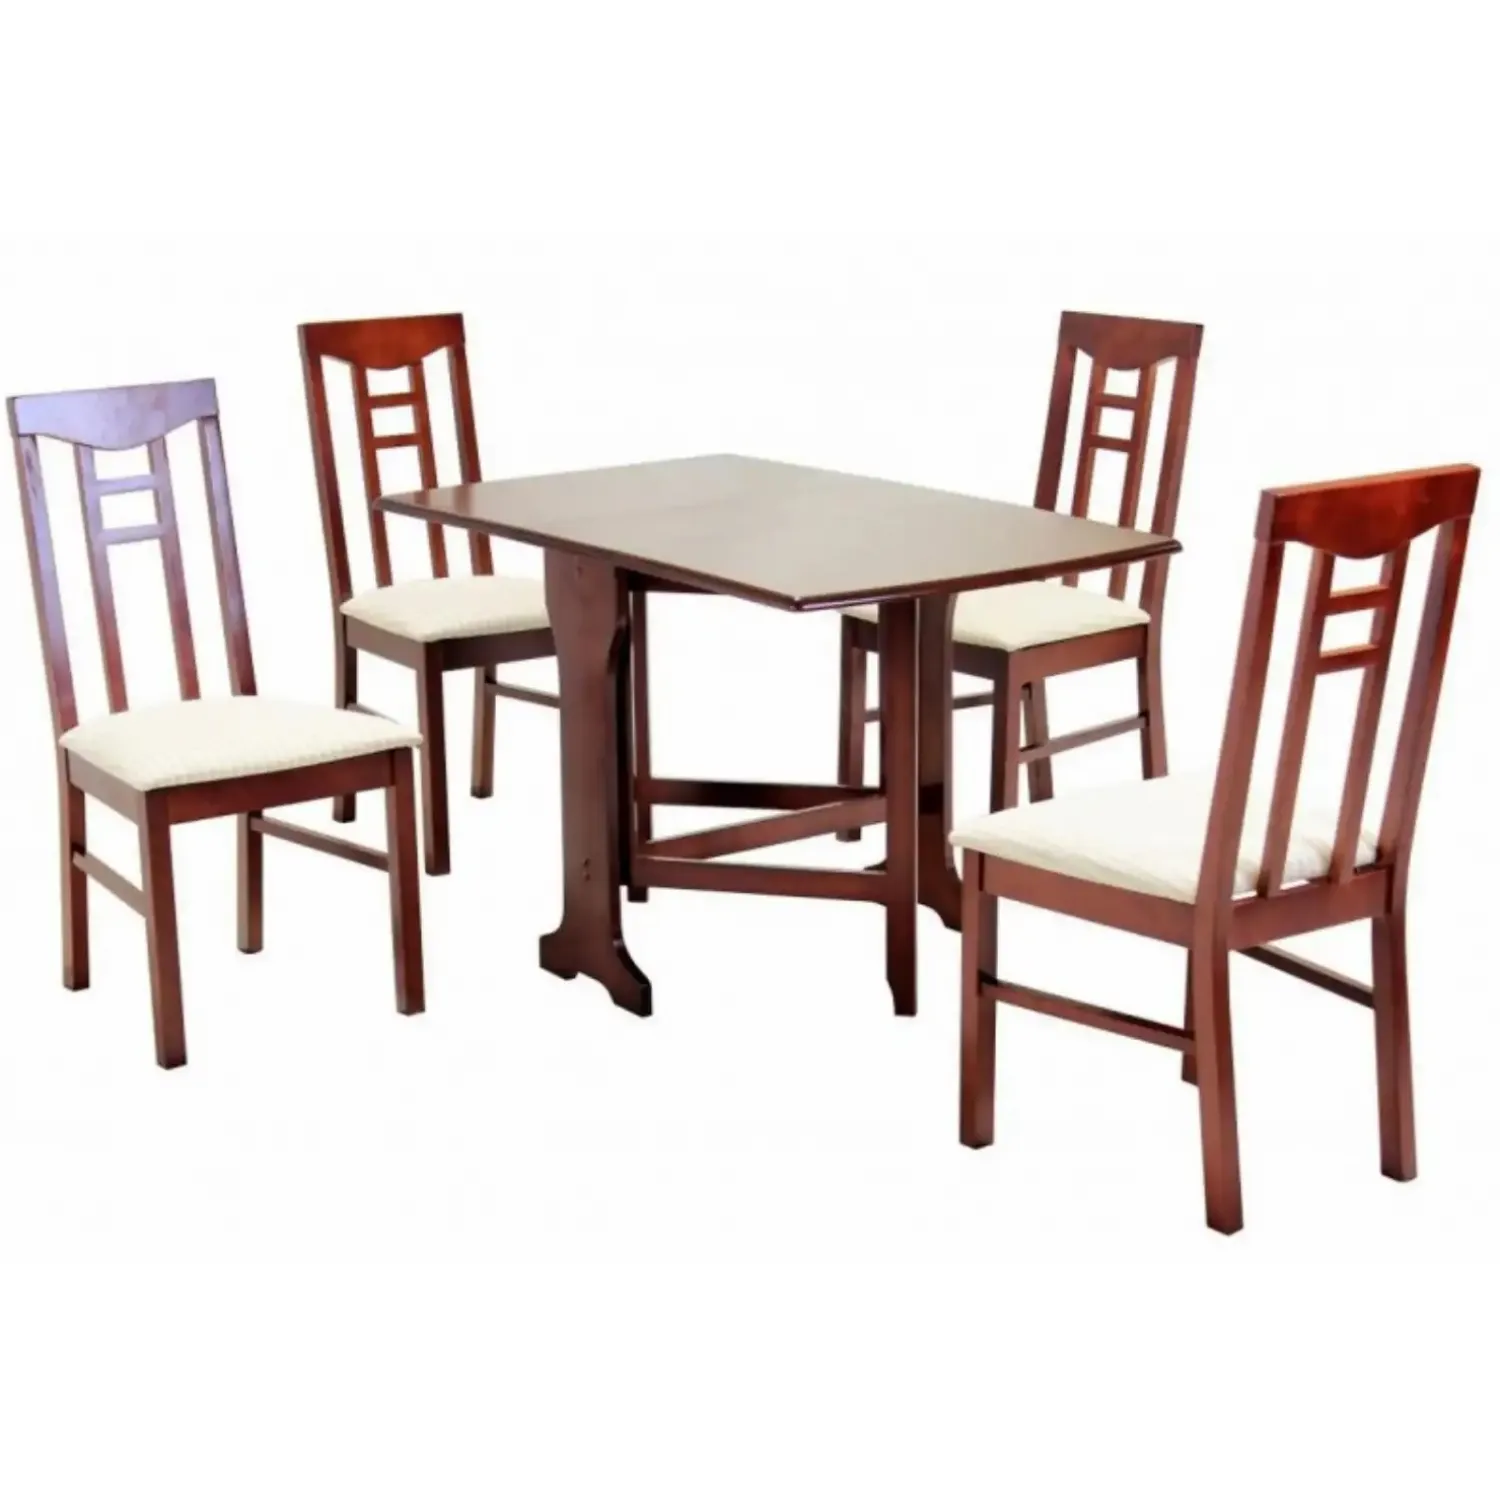 Mahogany Solid Rubberwood Rectangular Gateleg Dining Table and 4 Chairs